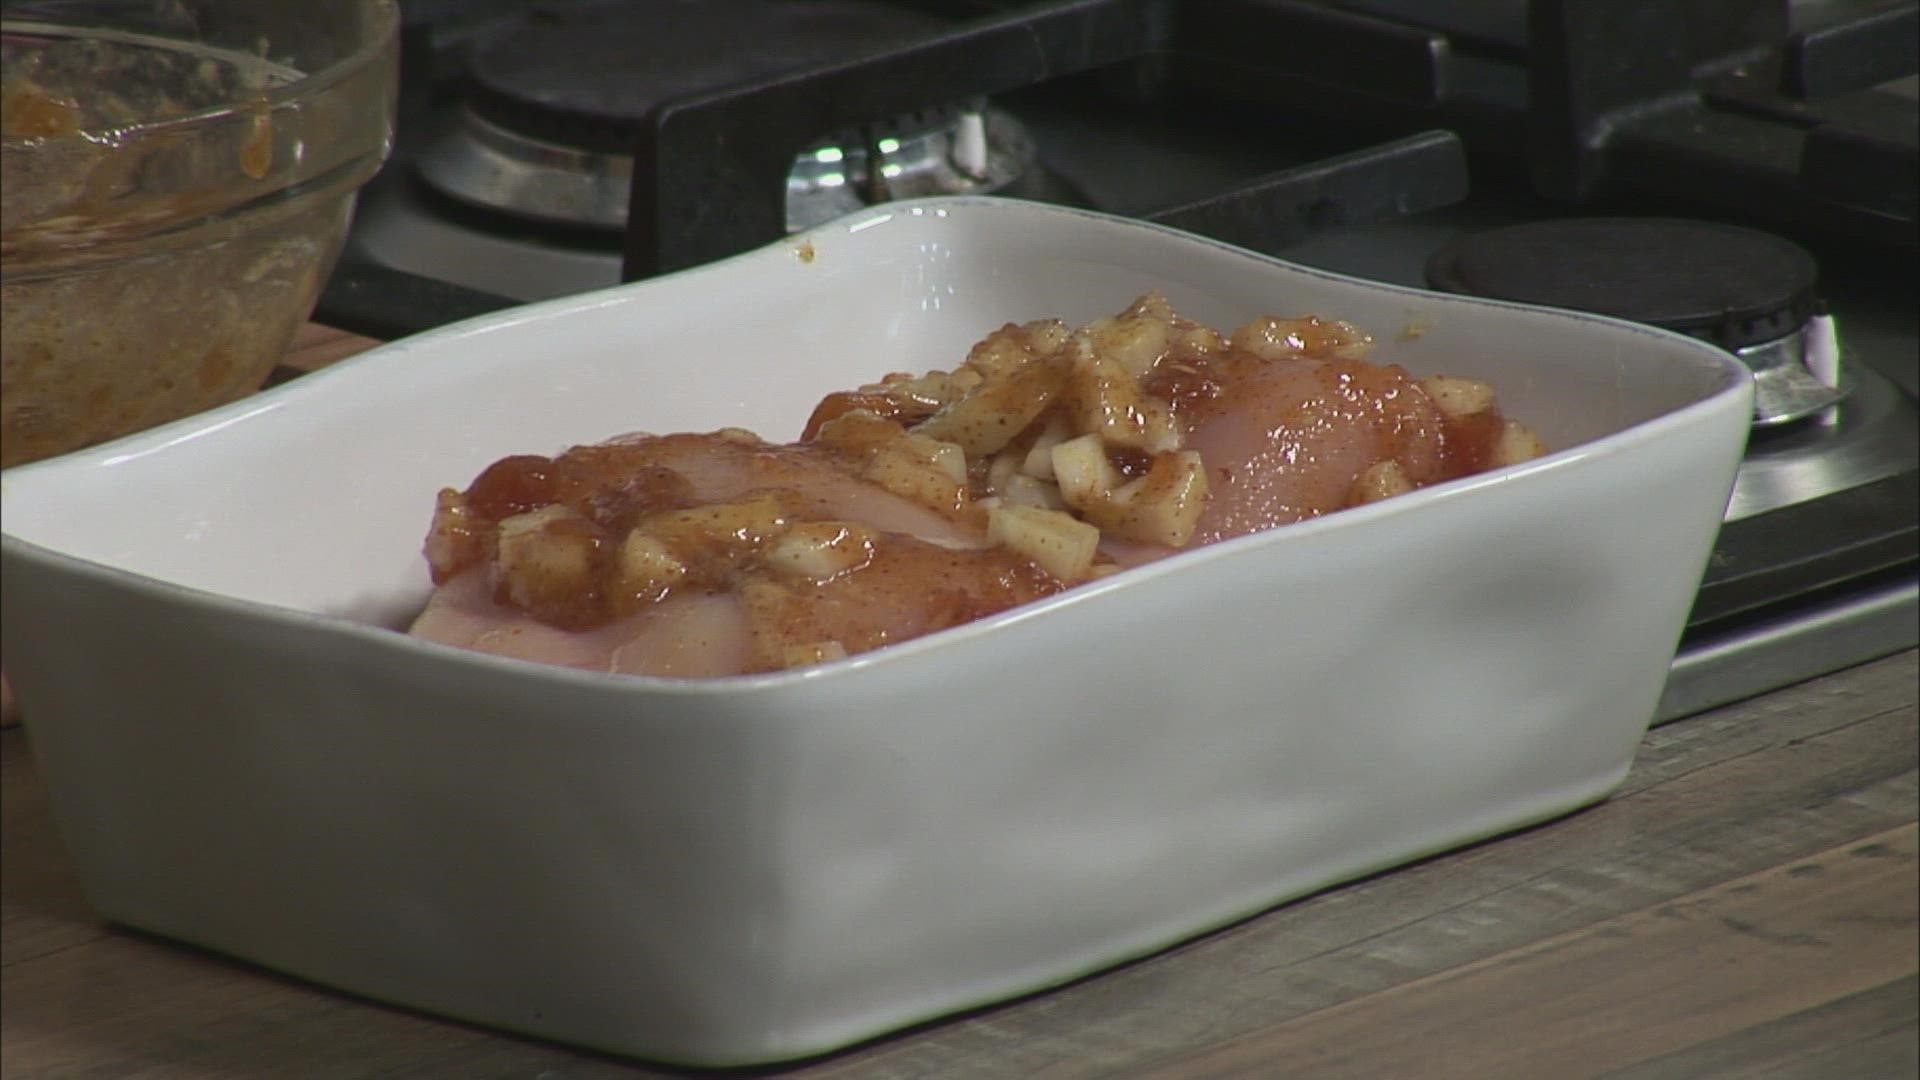 Cookbook author Allison Hill shares her recipe for Apricot Mustard Chicken.